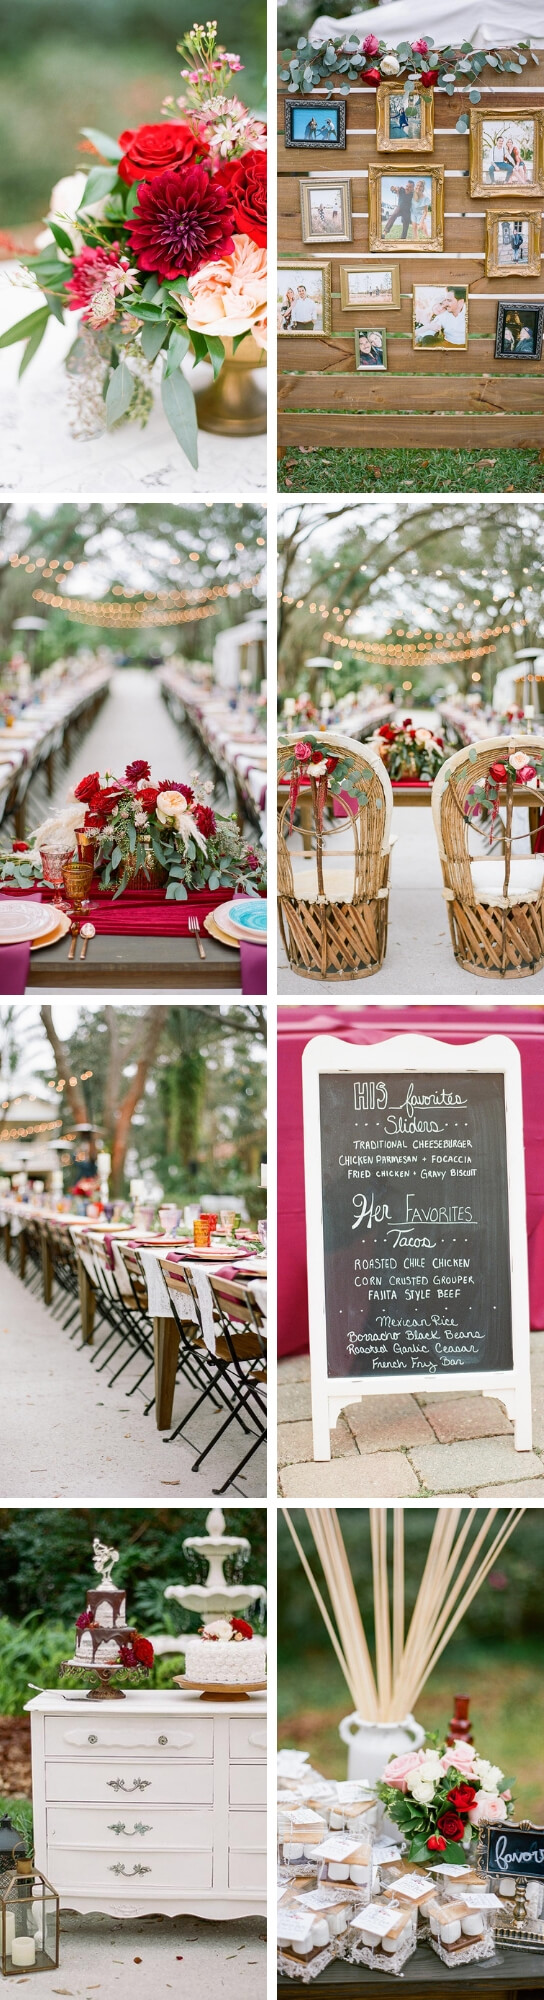 Colorful Eclectic and Vintage Wedding | Creative & Rustic Backyard Wedding Ideas For Summer & Fall